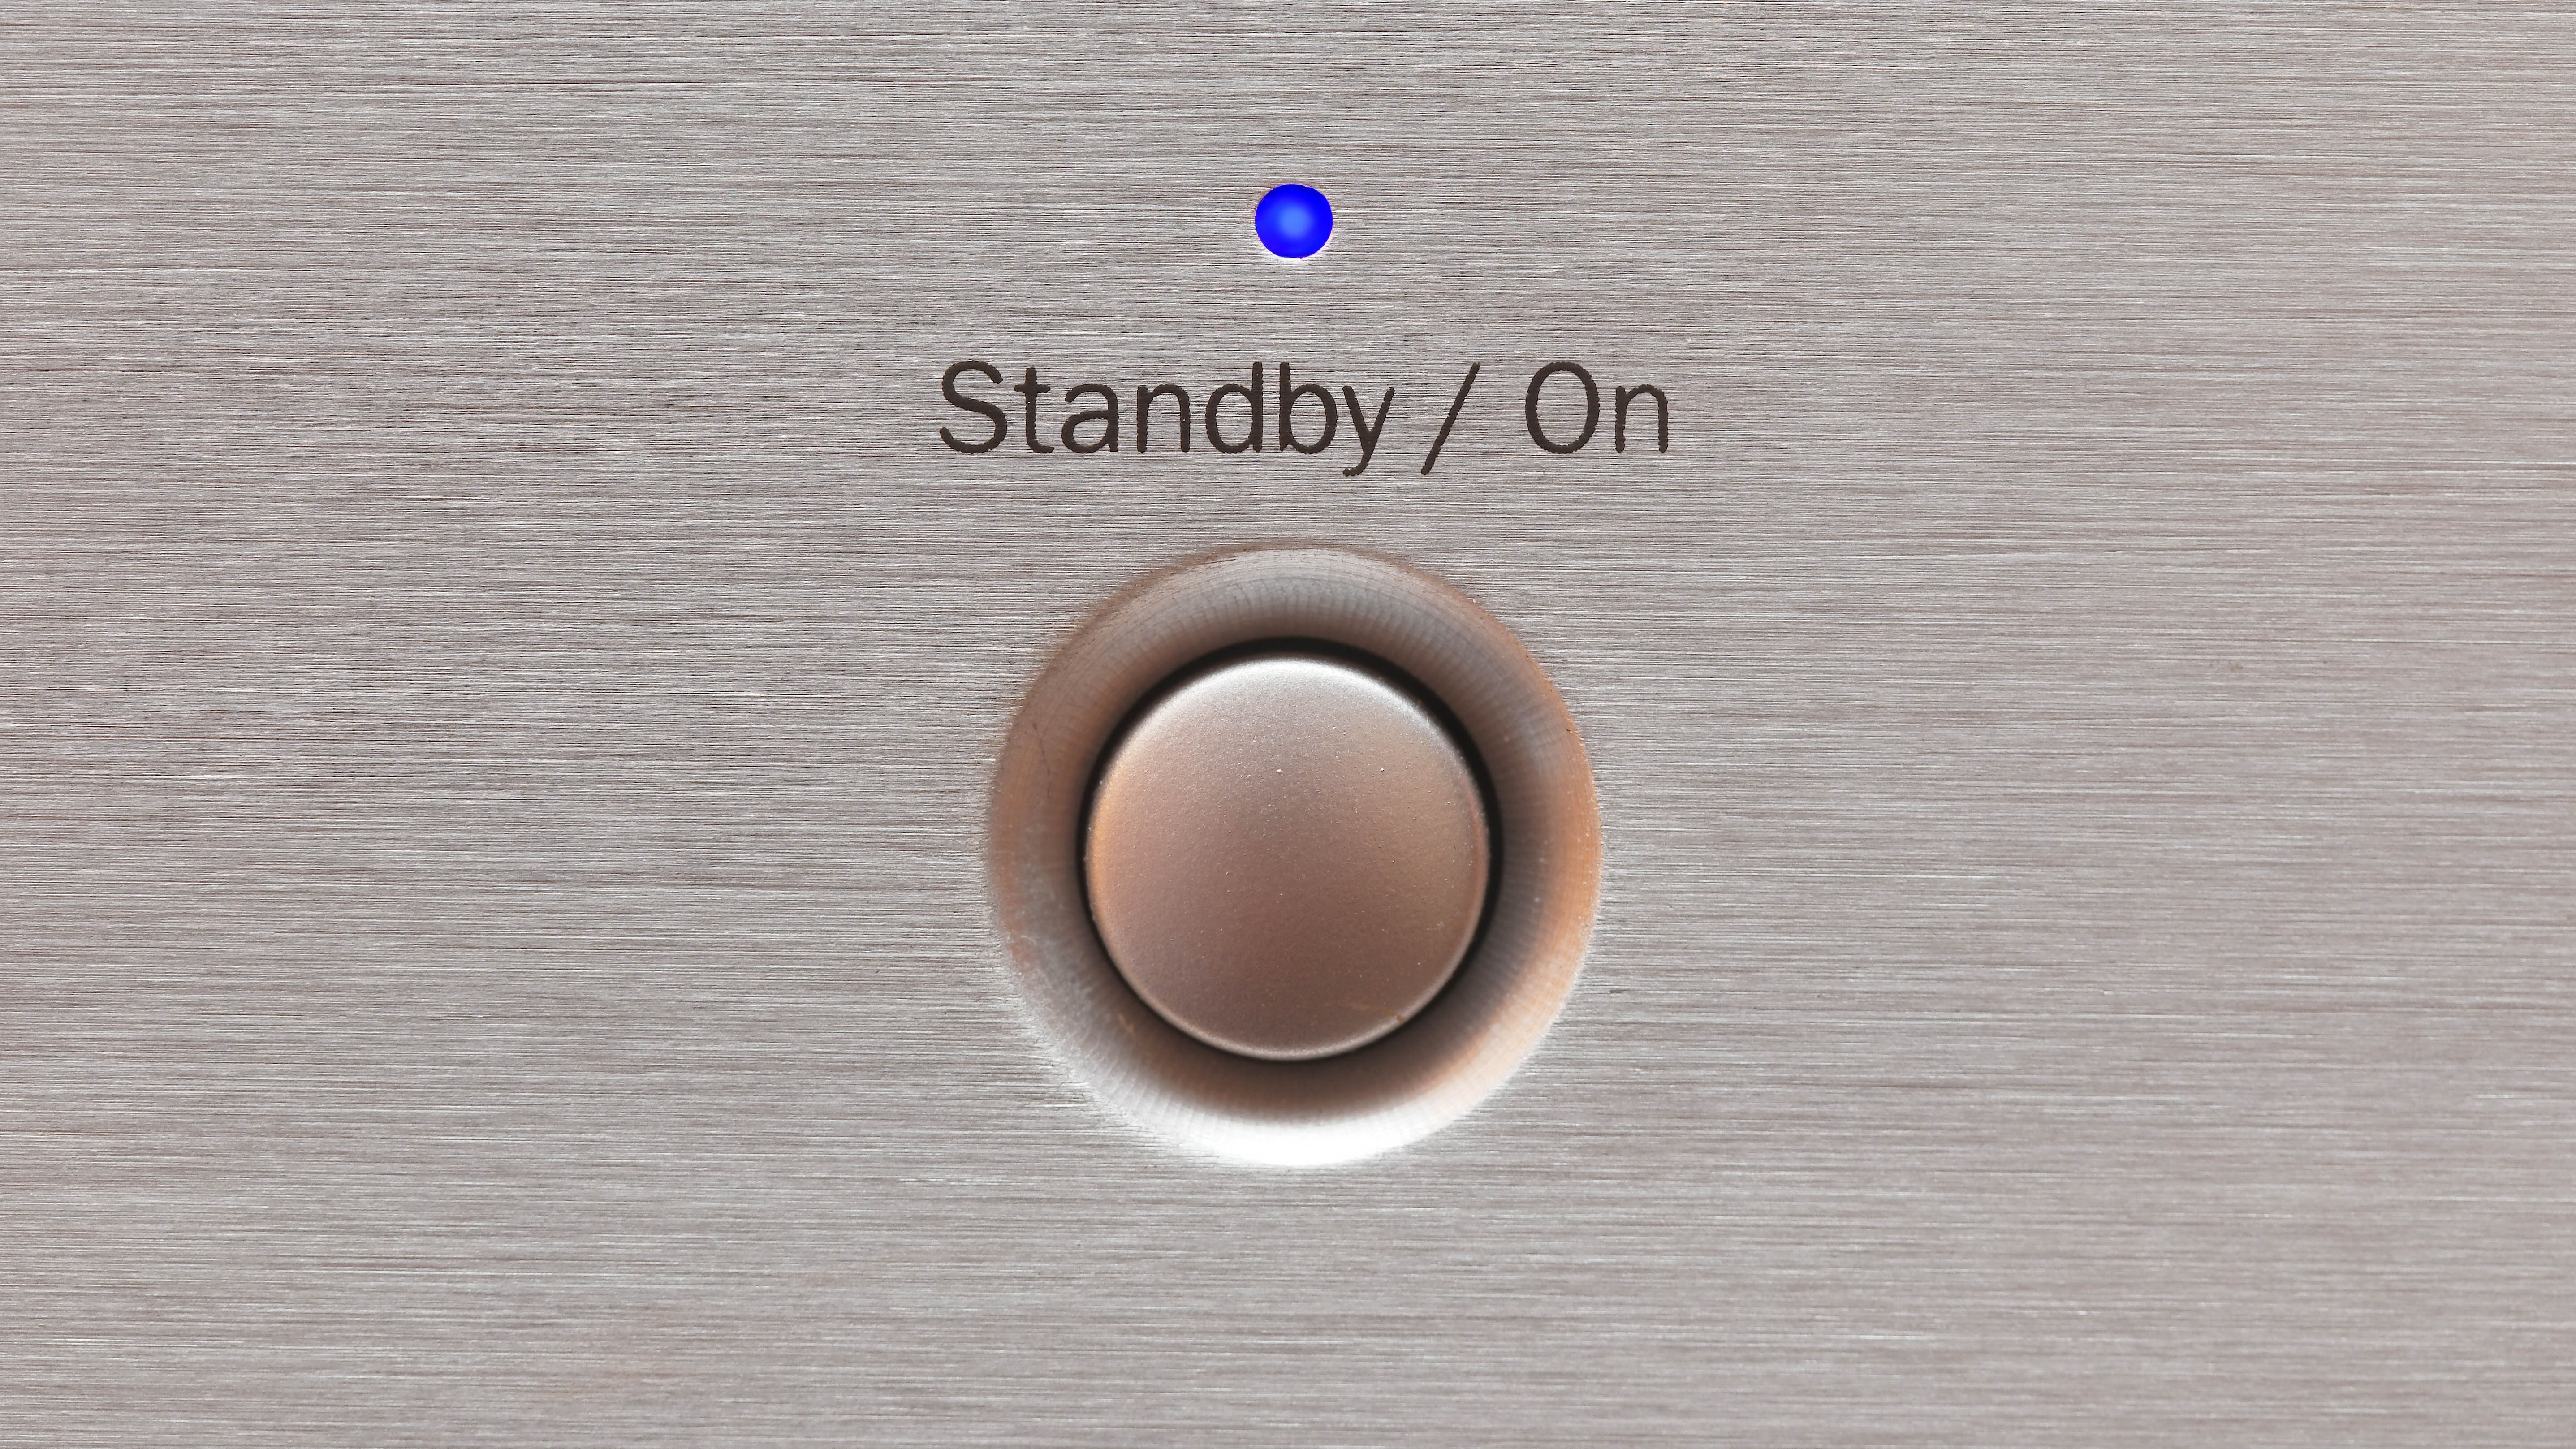 The power/standby button on an appliance